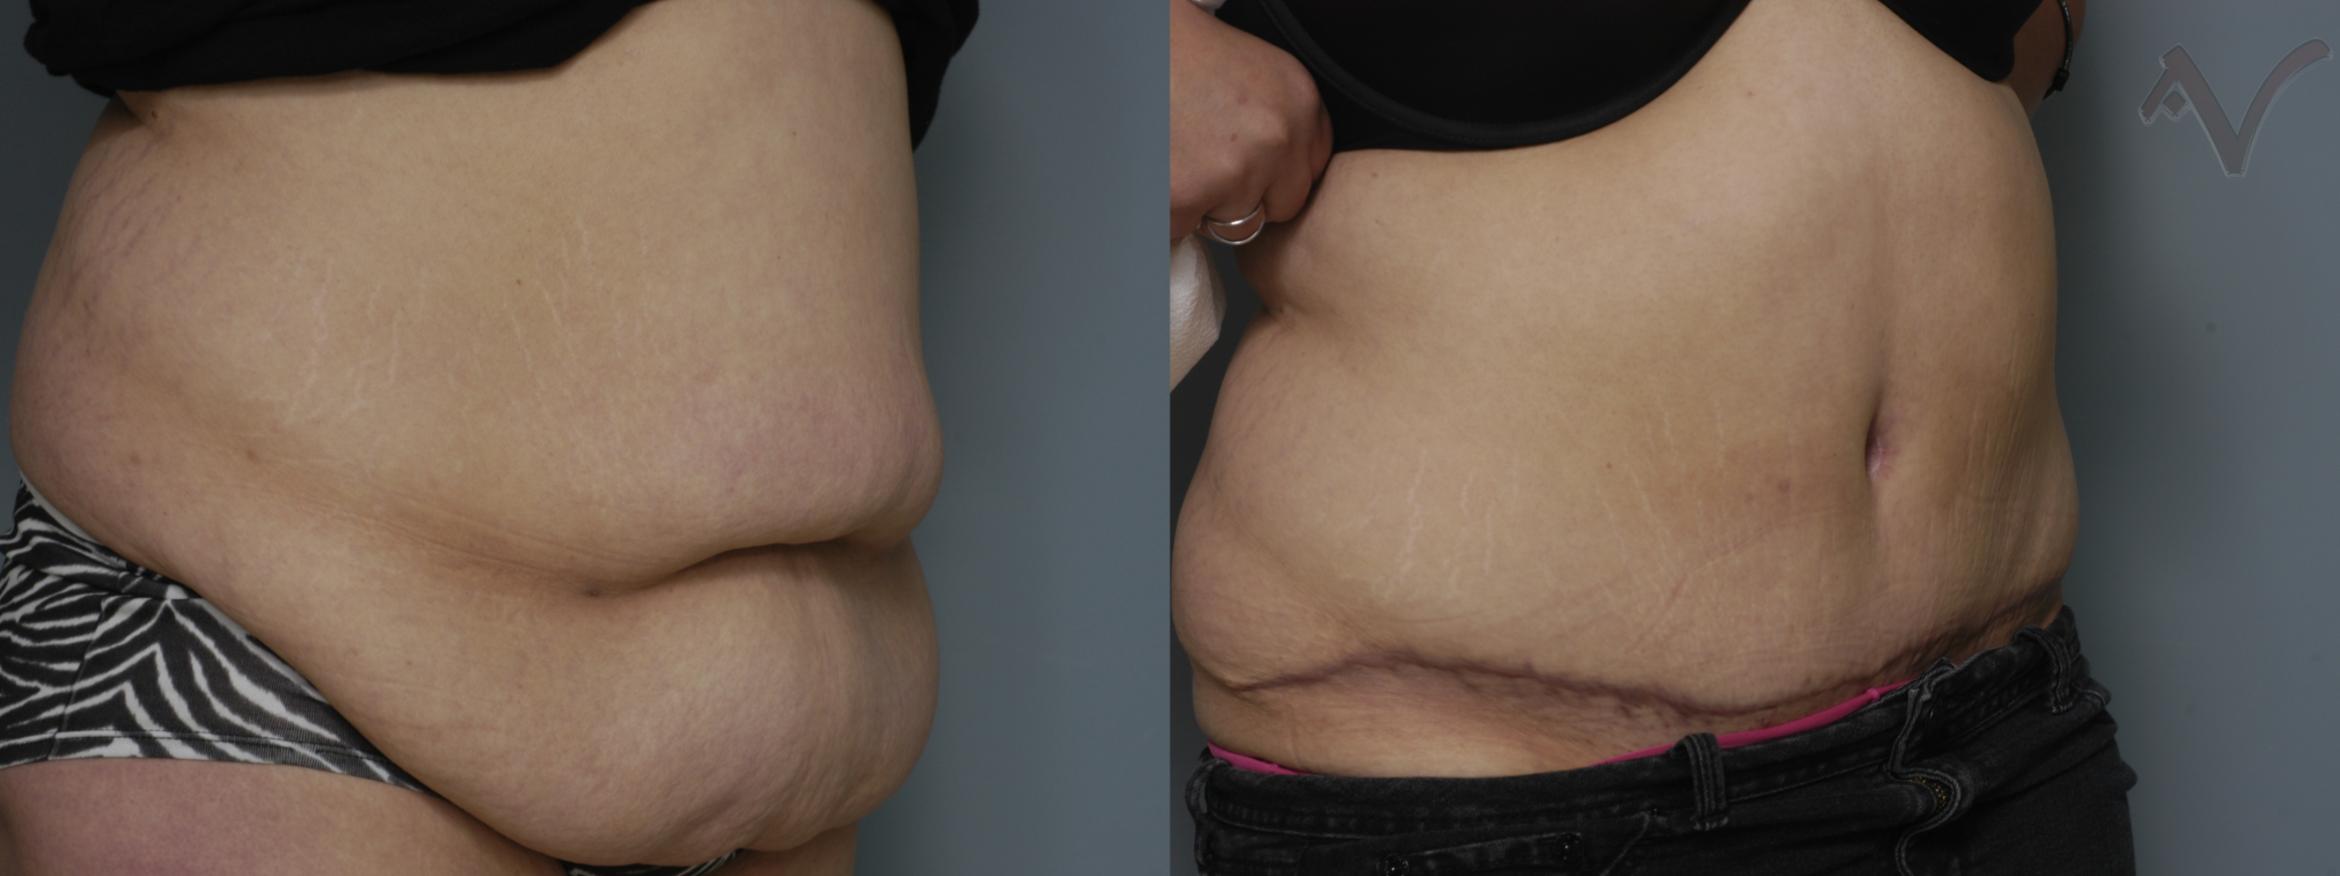 Tummy Tuck Before and After Pictures Case 270 | Los Angeles, CA | Armen  Vartany, MD, FACS: Plastic Surgery & Laser Center